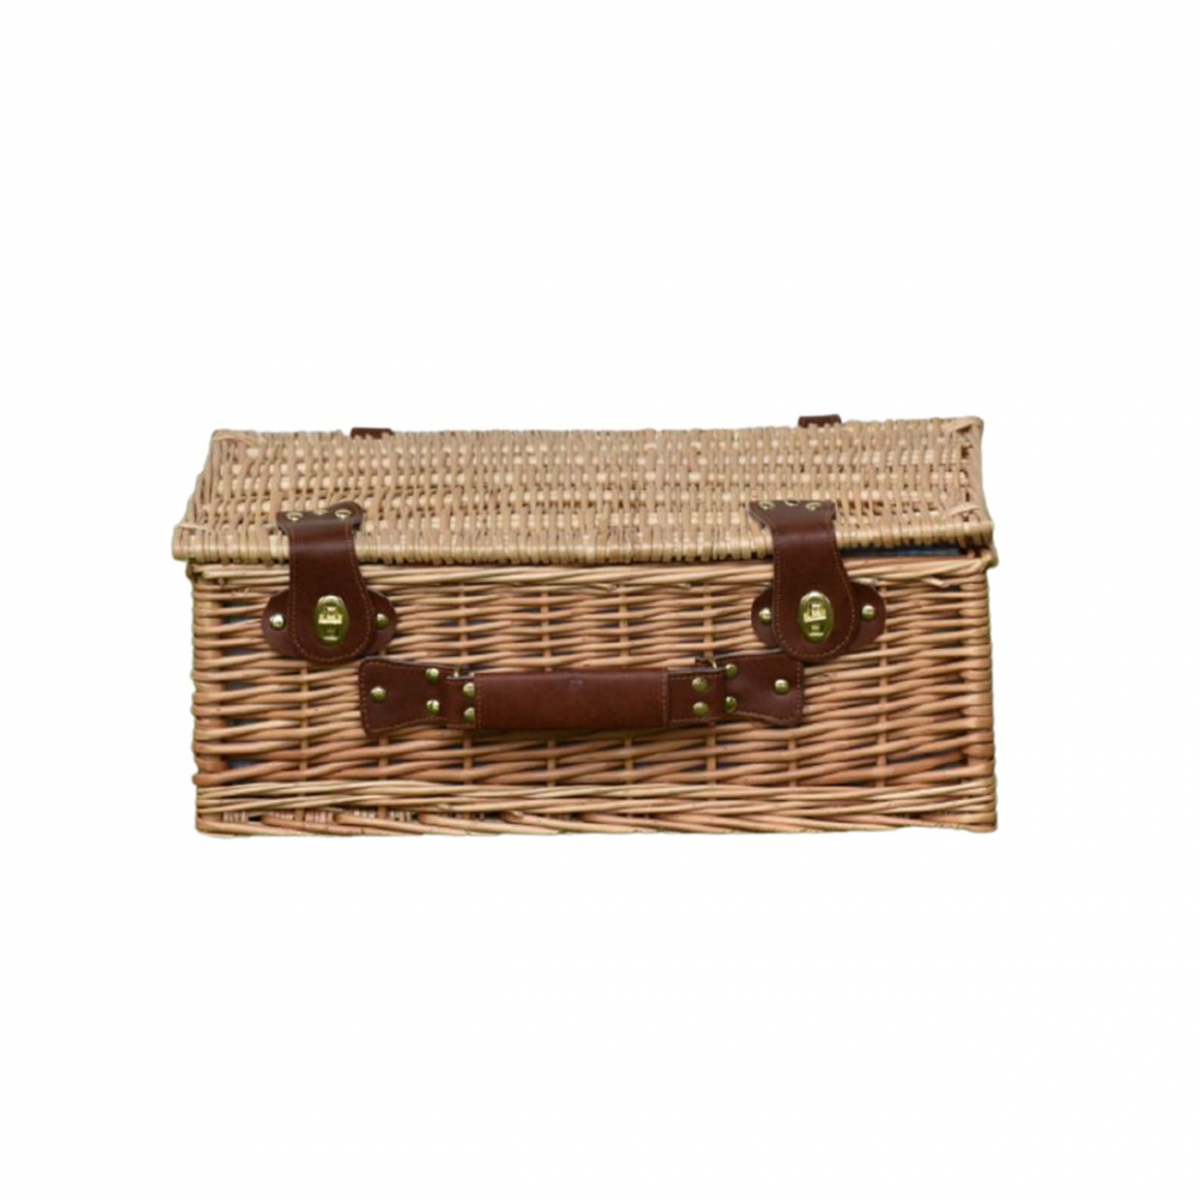 Picnic wicker suitcase with accessories